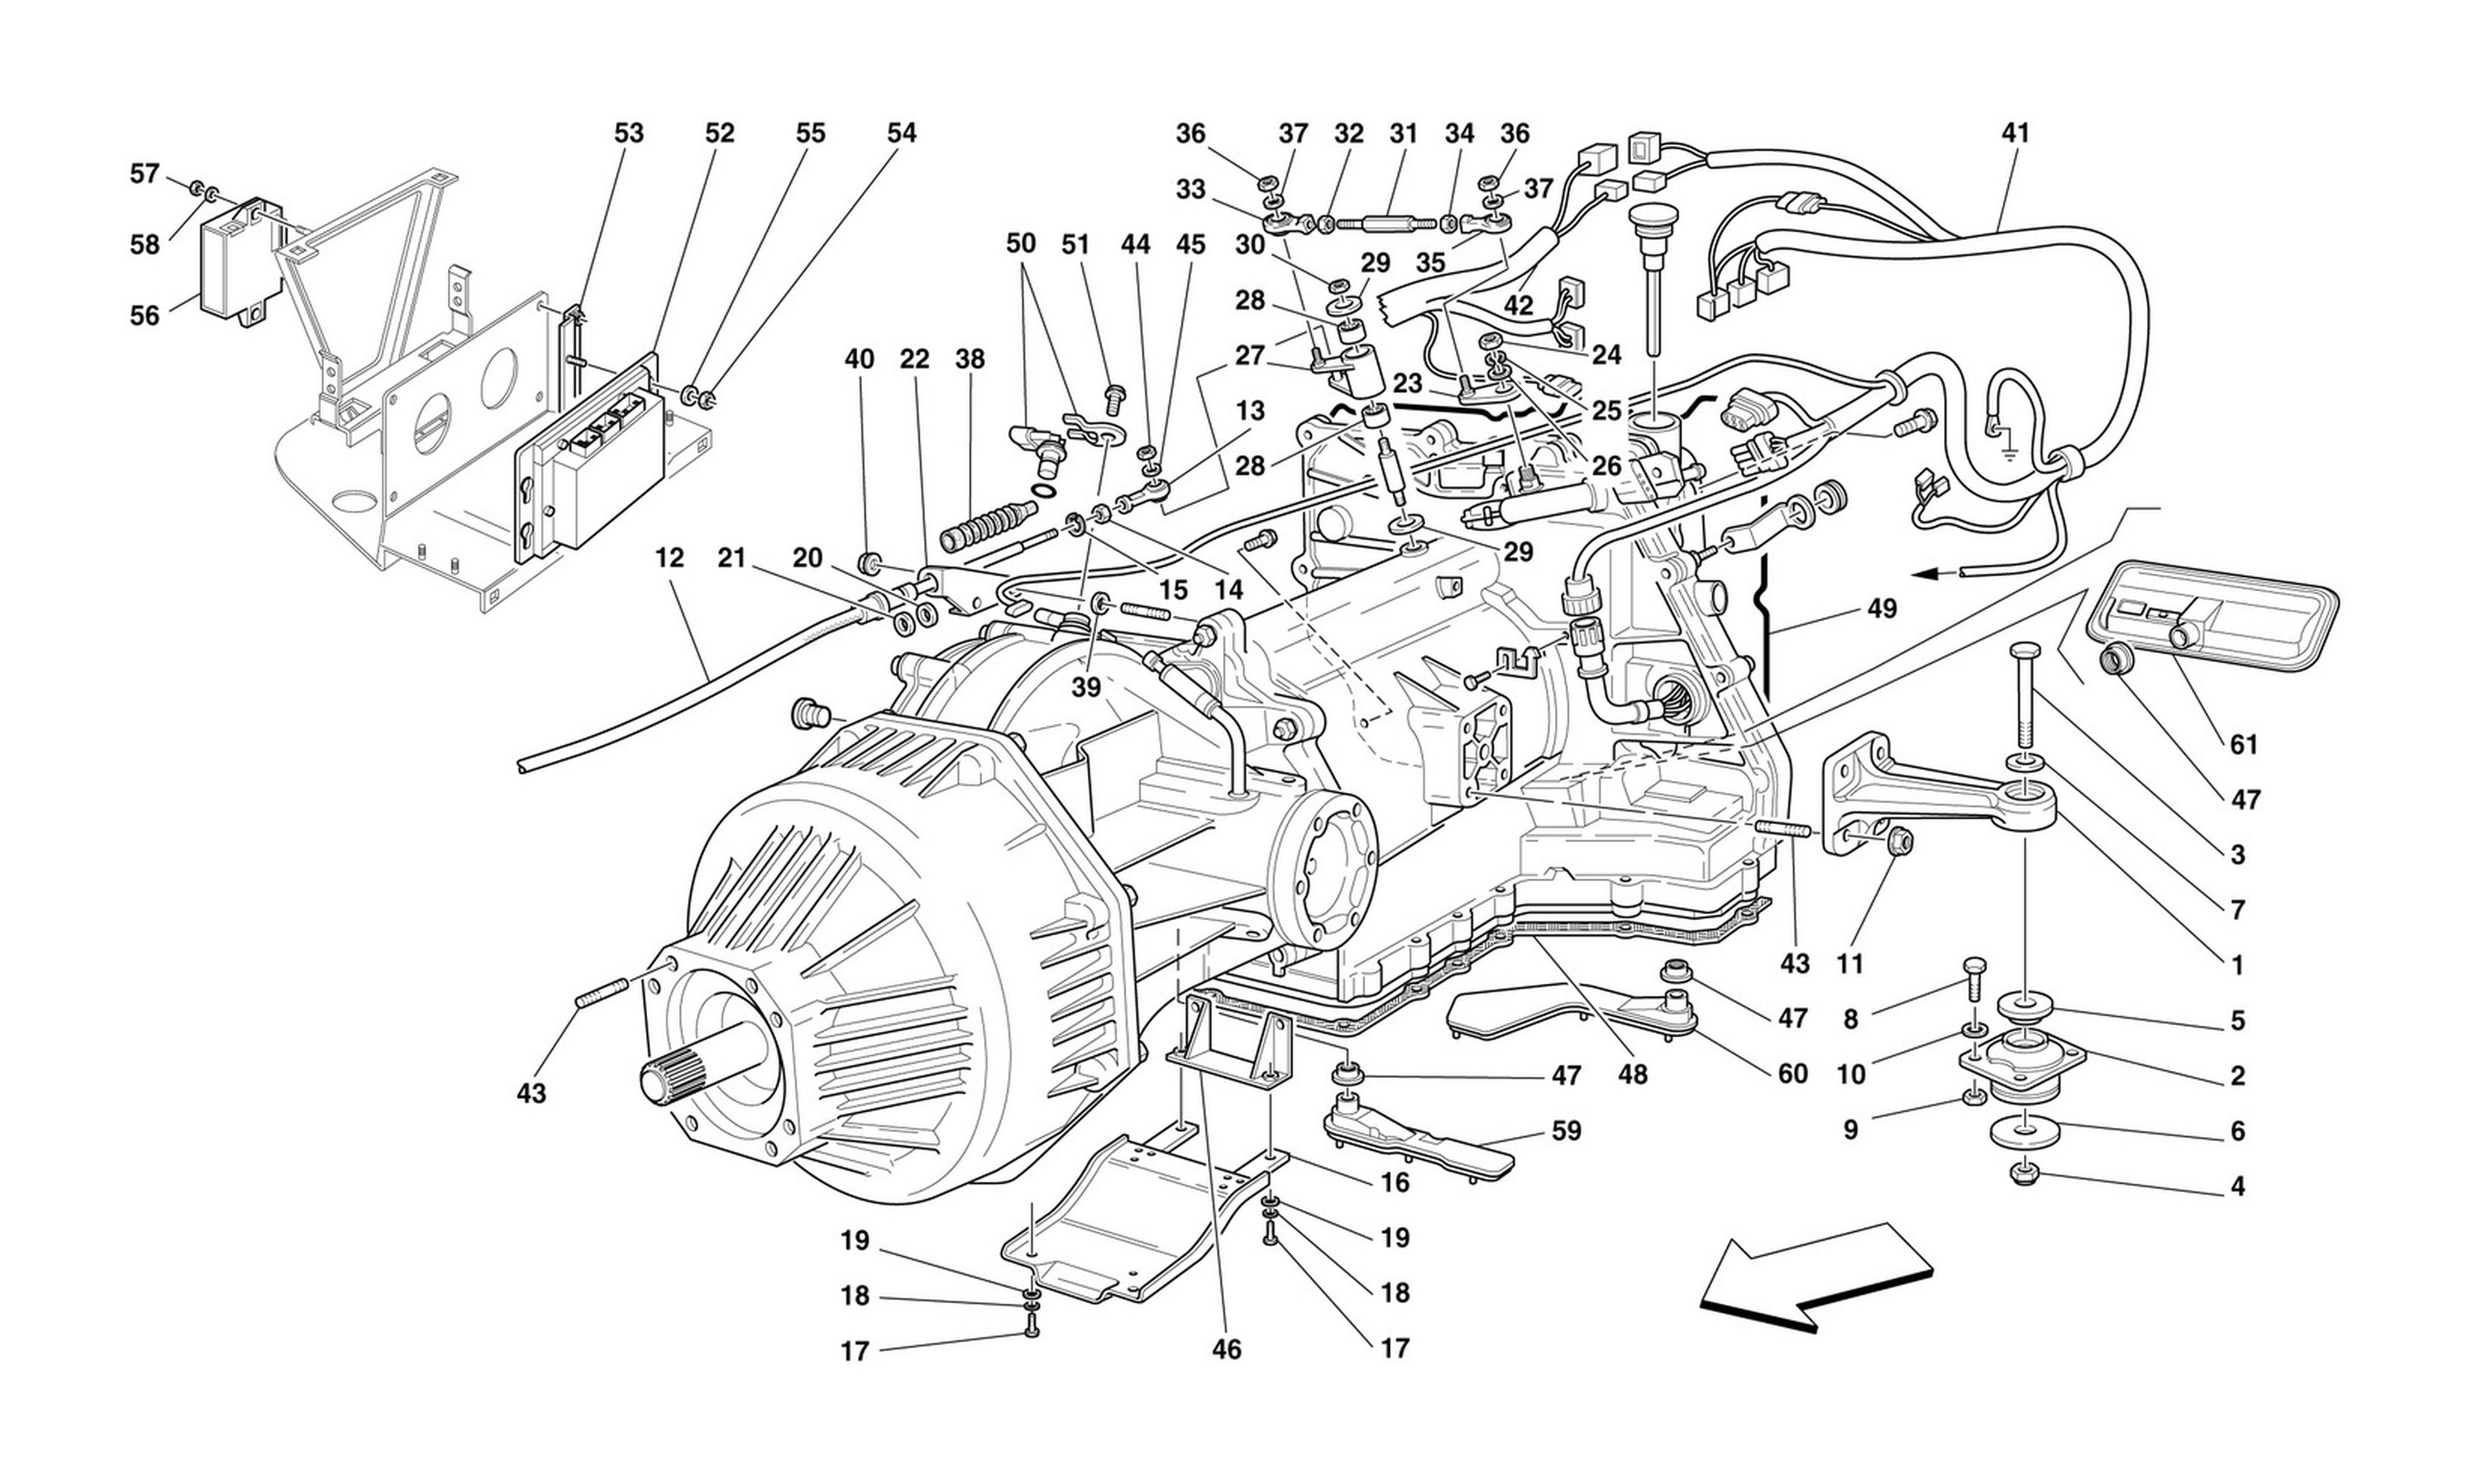 Schematic: Complete Gearbox -Valid For 456 Gta